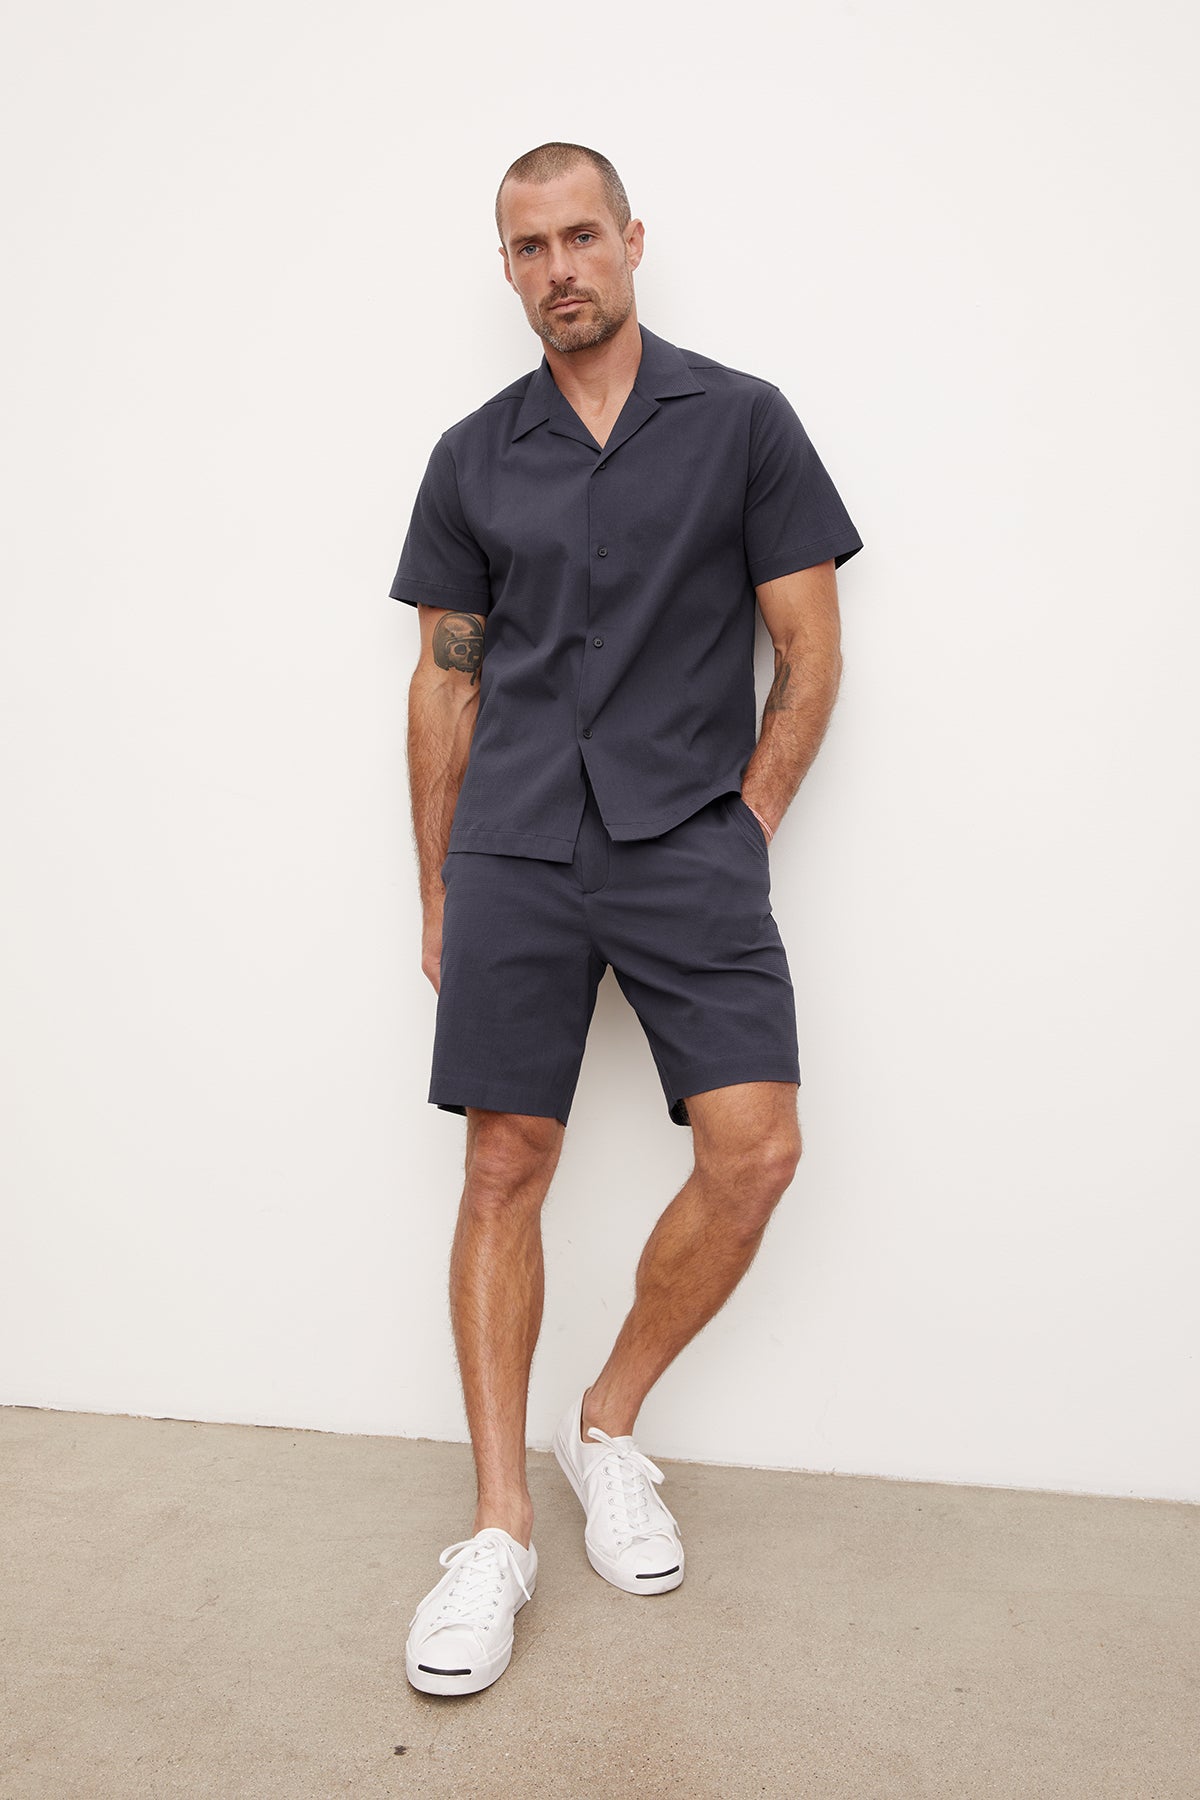 A man in a navy blue seersucker cotton FRANK BUTTON-UP SHIRT and matching shorts stands against a white background. He wears white sneakers and has a tattoo on his left arm. (Brand Name: Velvet by Graham & Spencer)-36909299892417